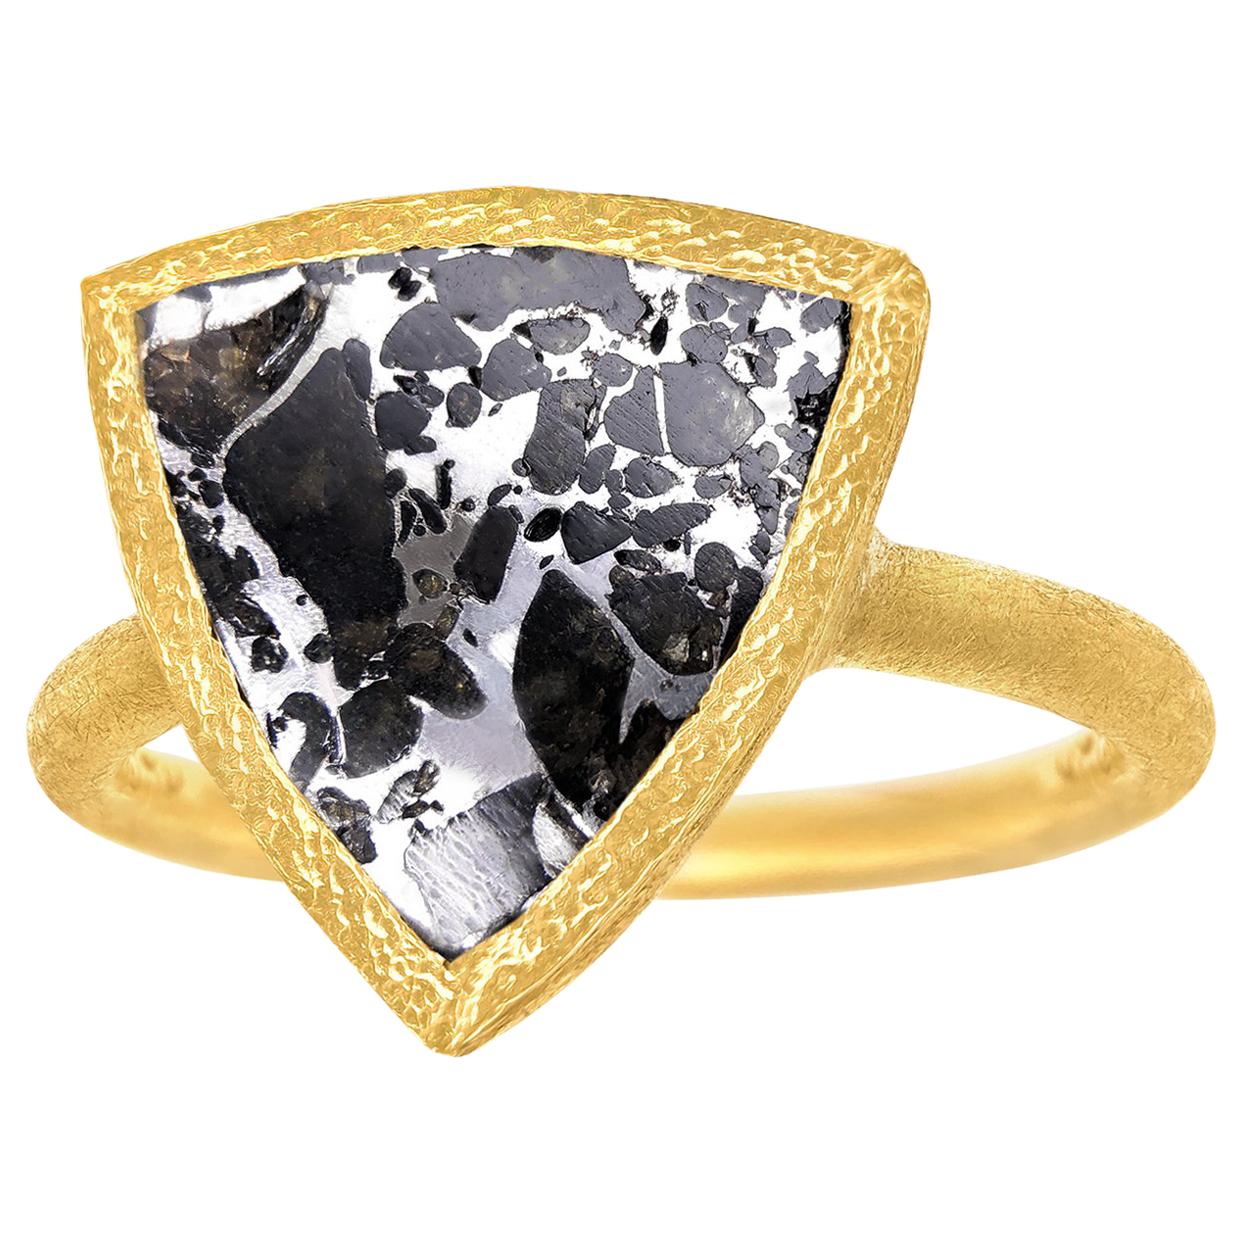 Devta Doolan Reflective Meteorite Gold One of a Kind Solitaire Ring